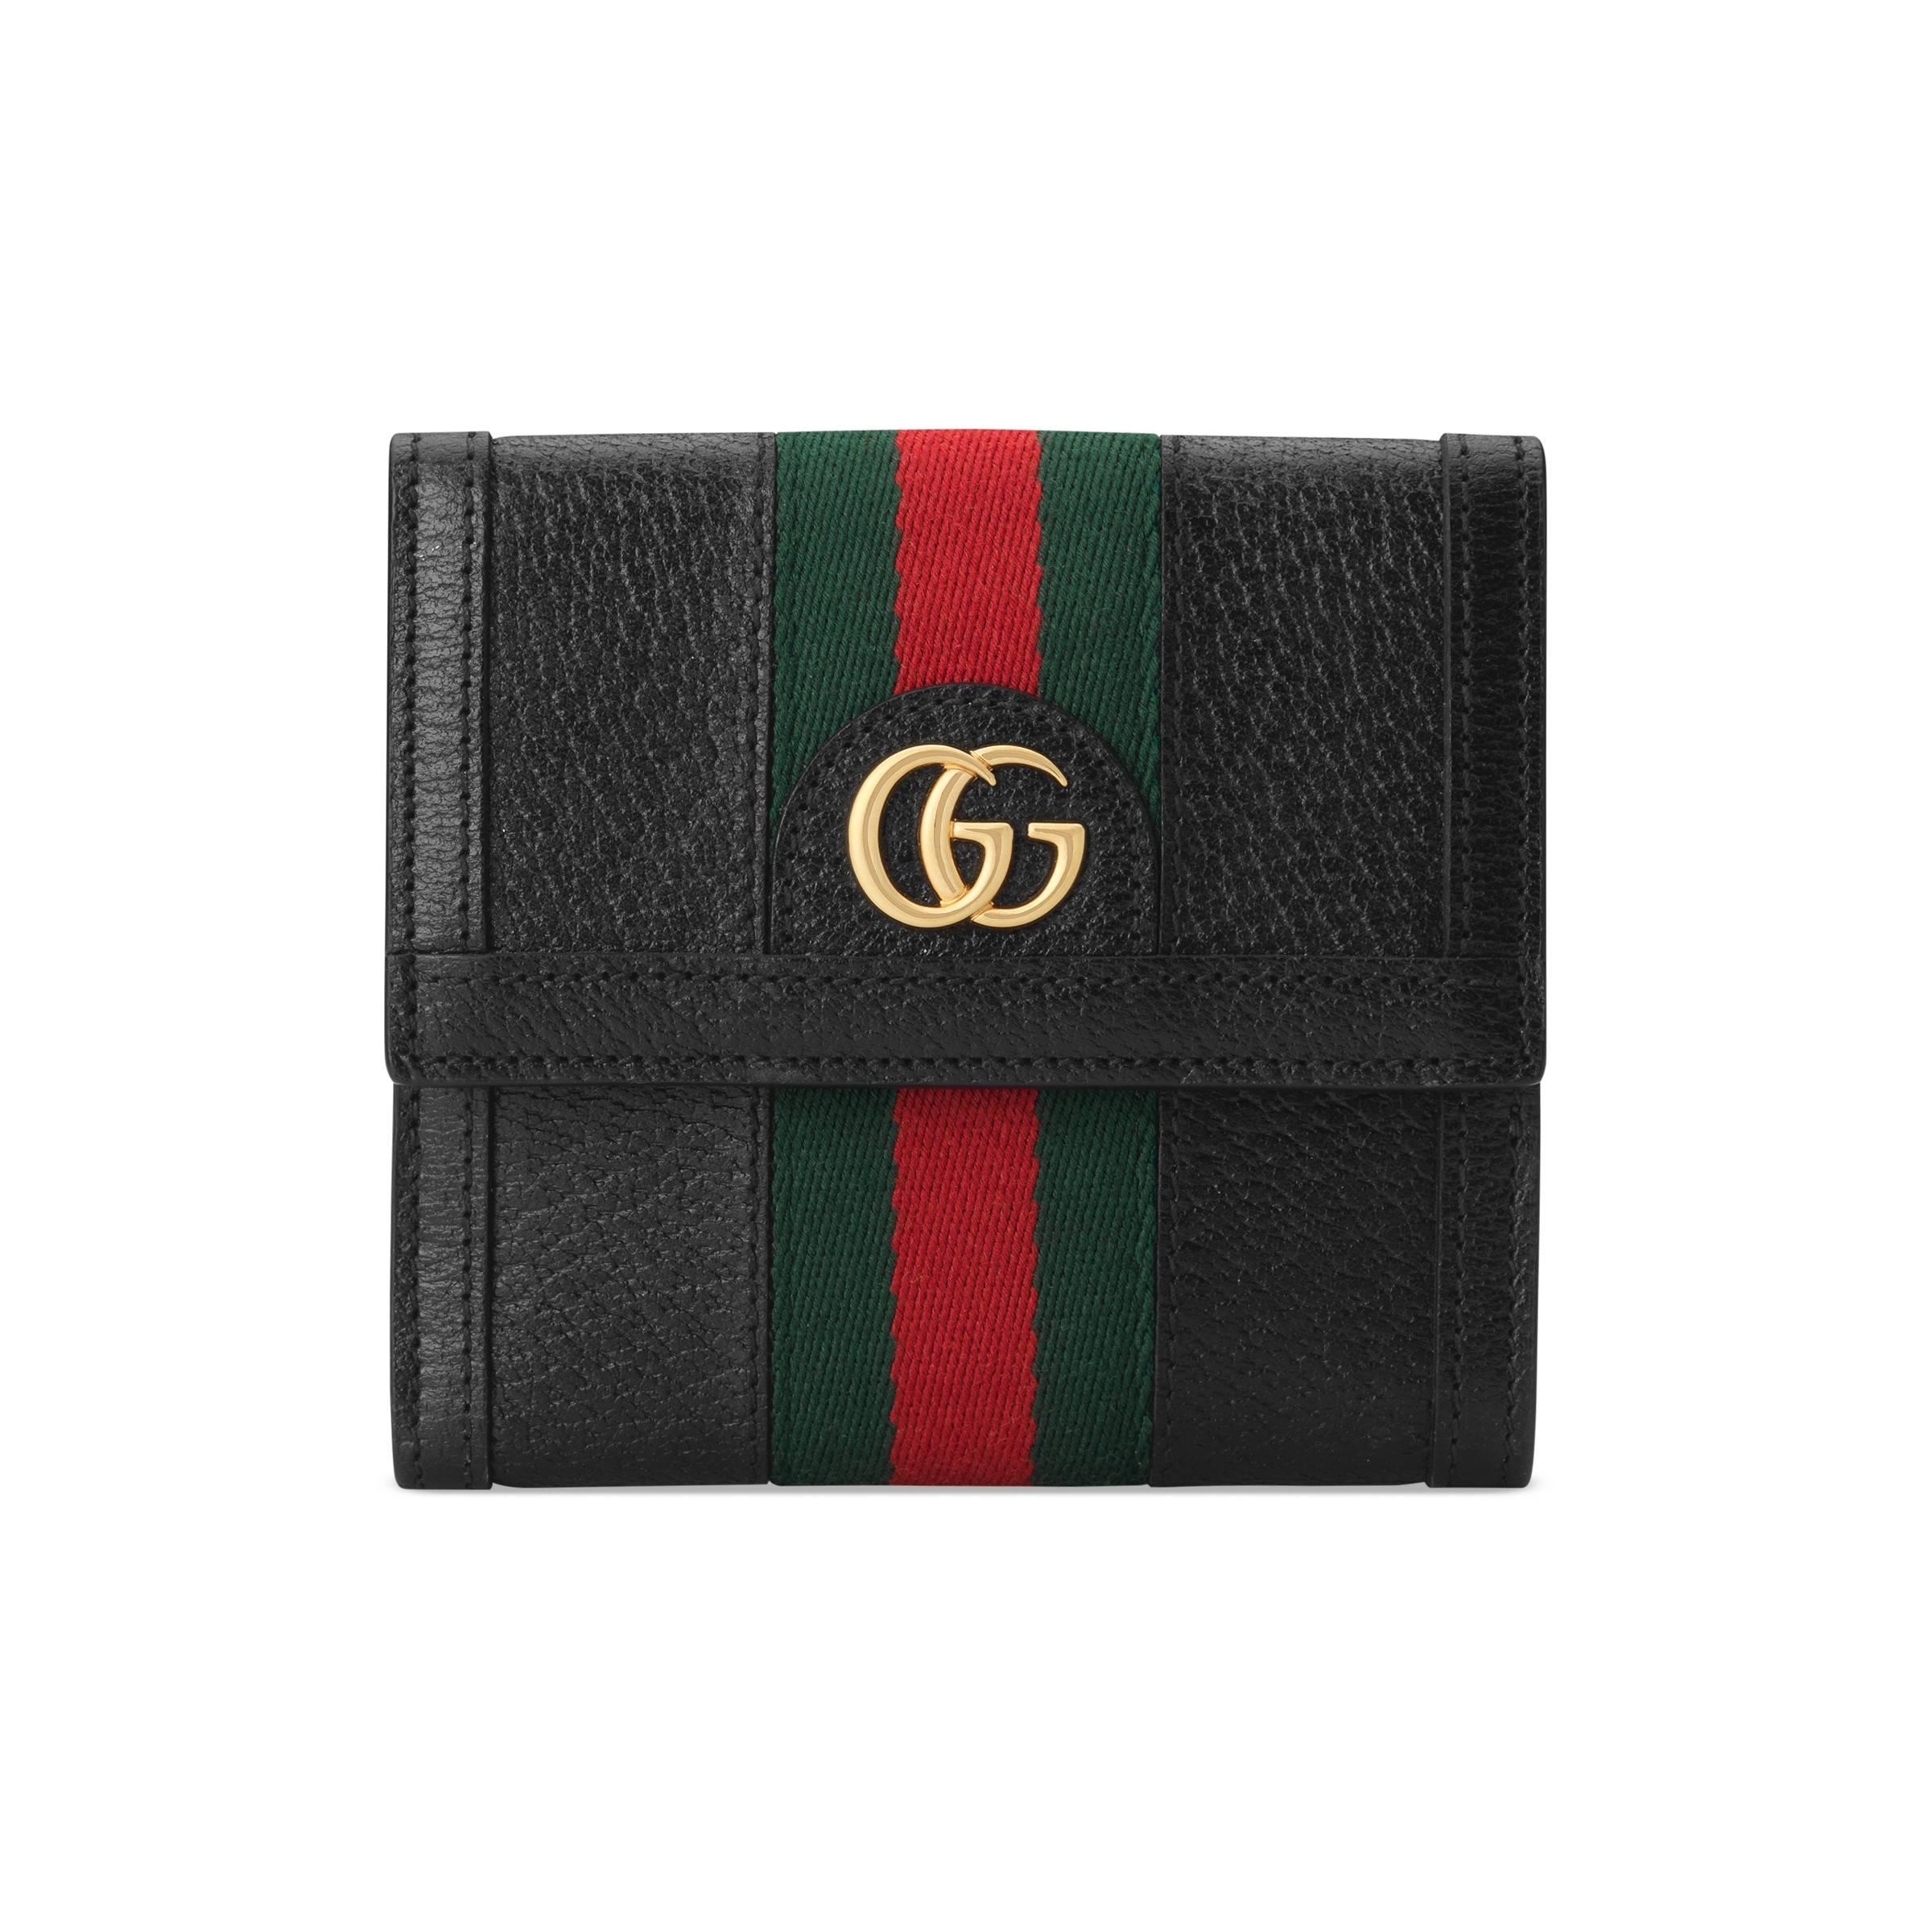 Gucci Leather Ophidia French Flap Wallet in Black Leather (Black) - Save 31% - Lyst